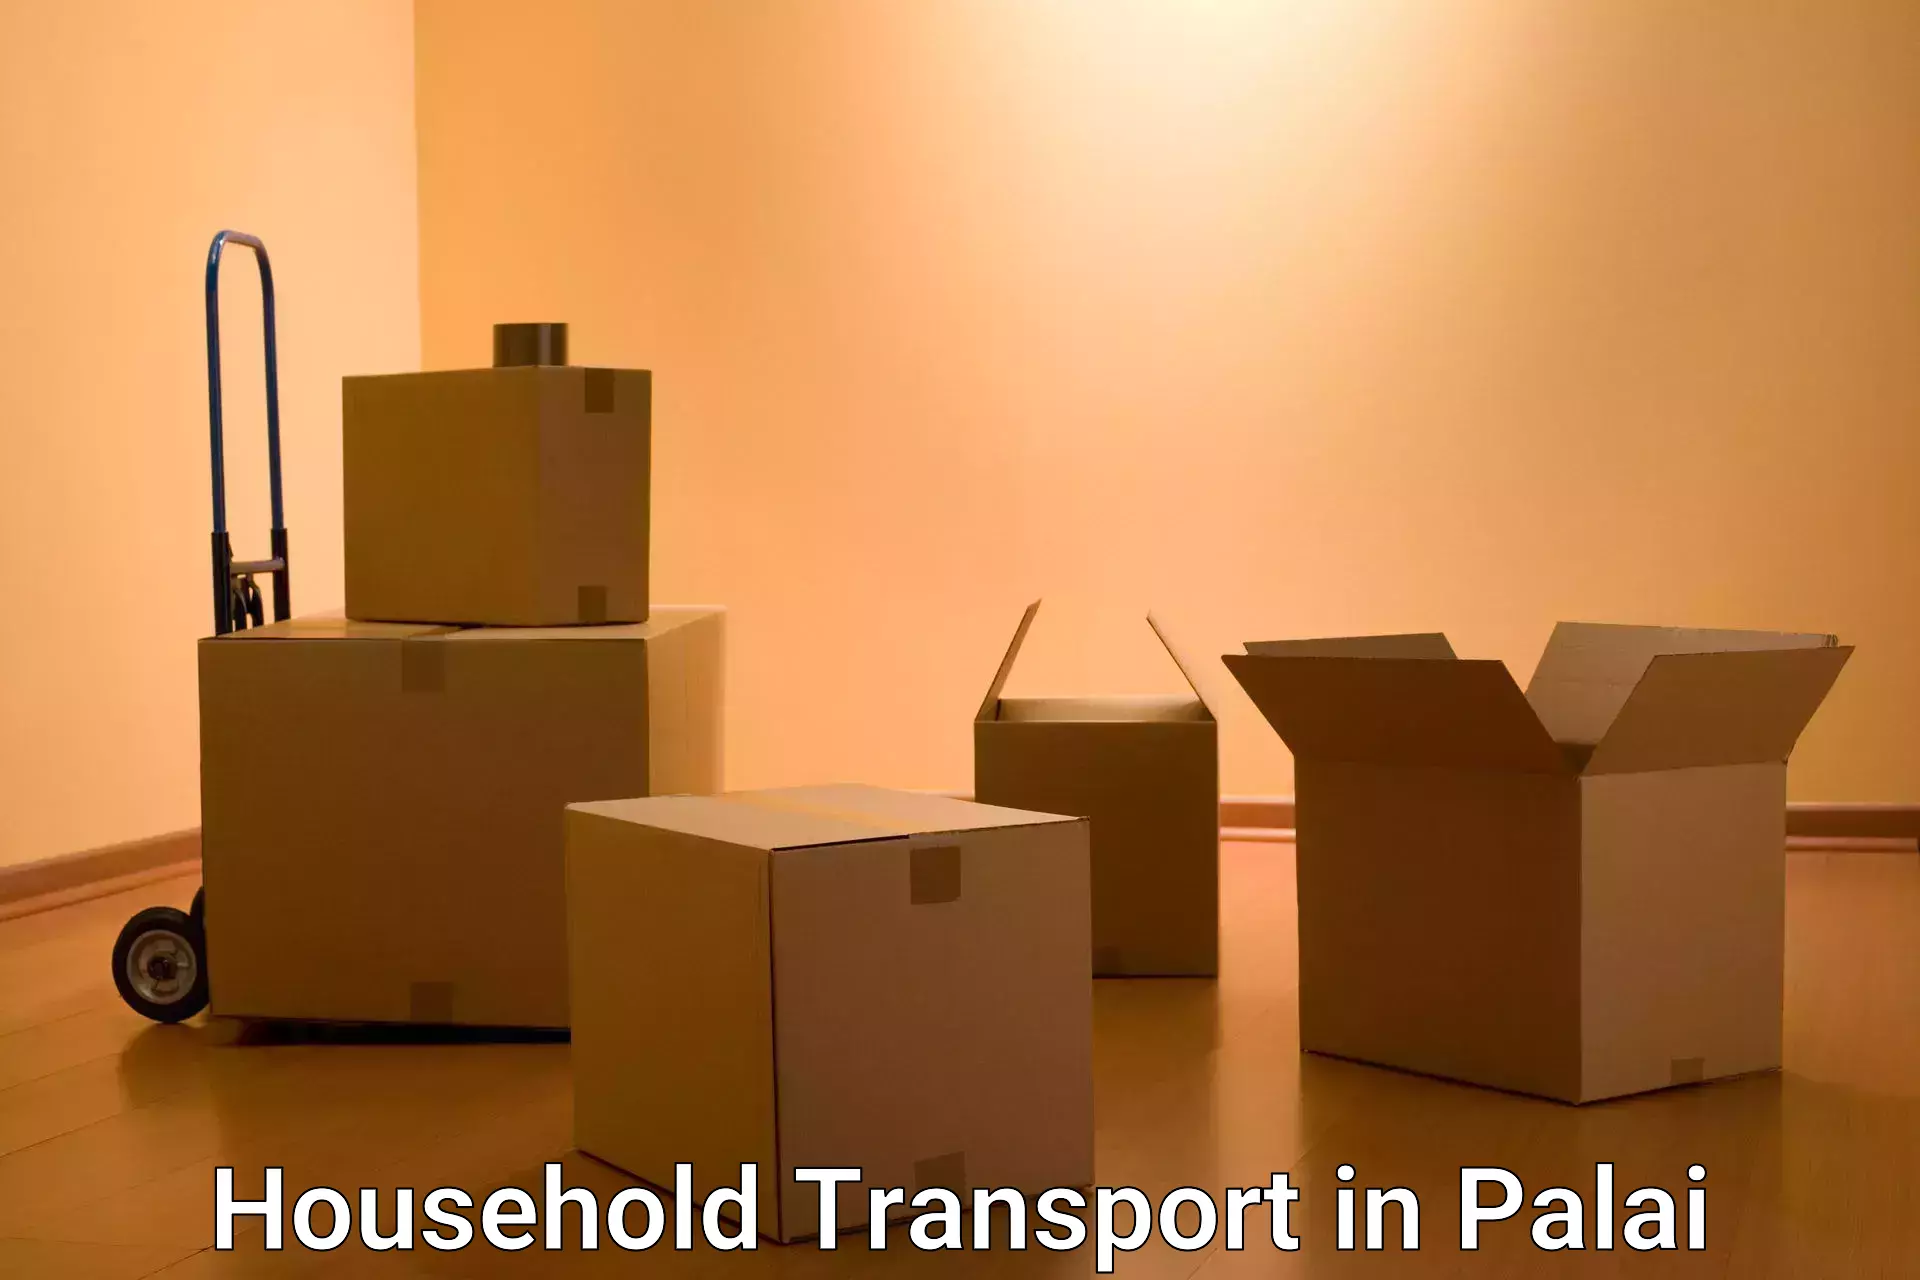 Quality relocation services in Palai